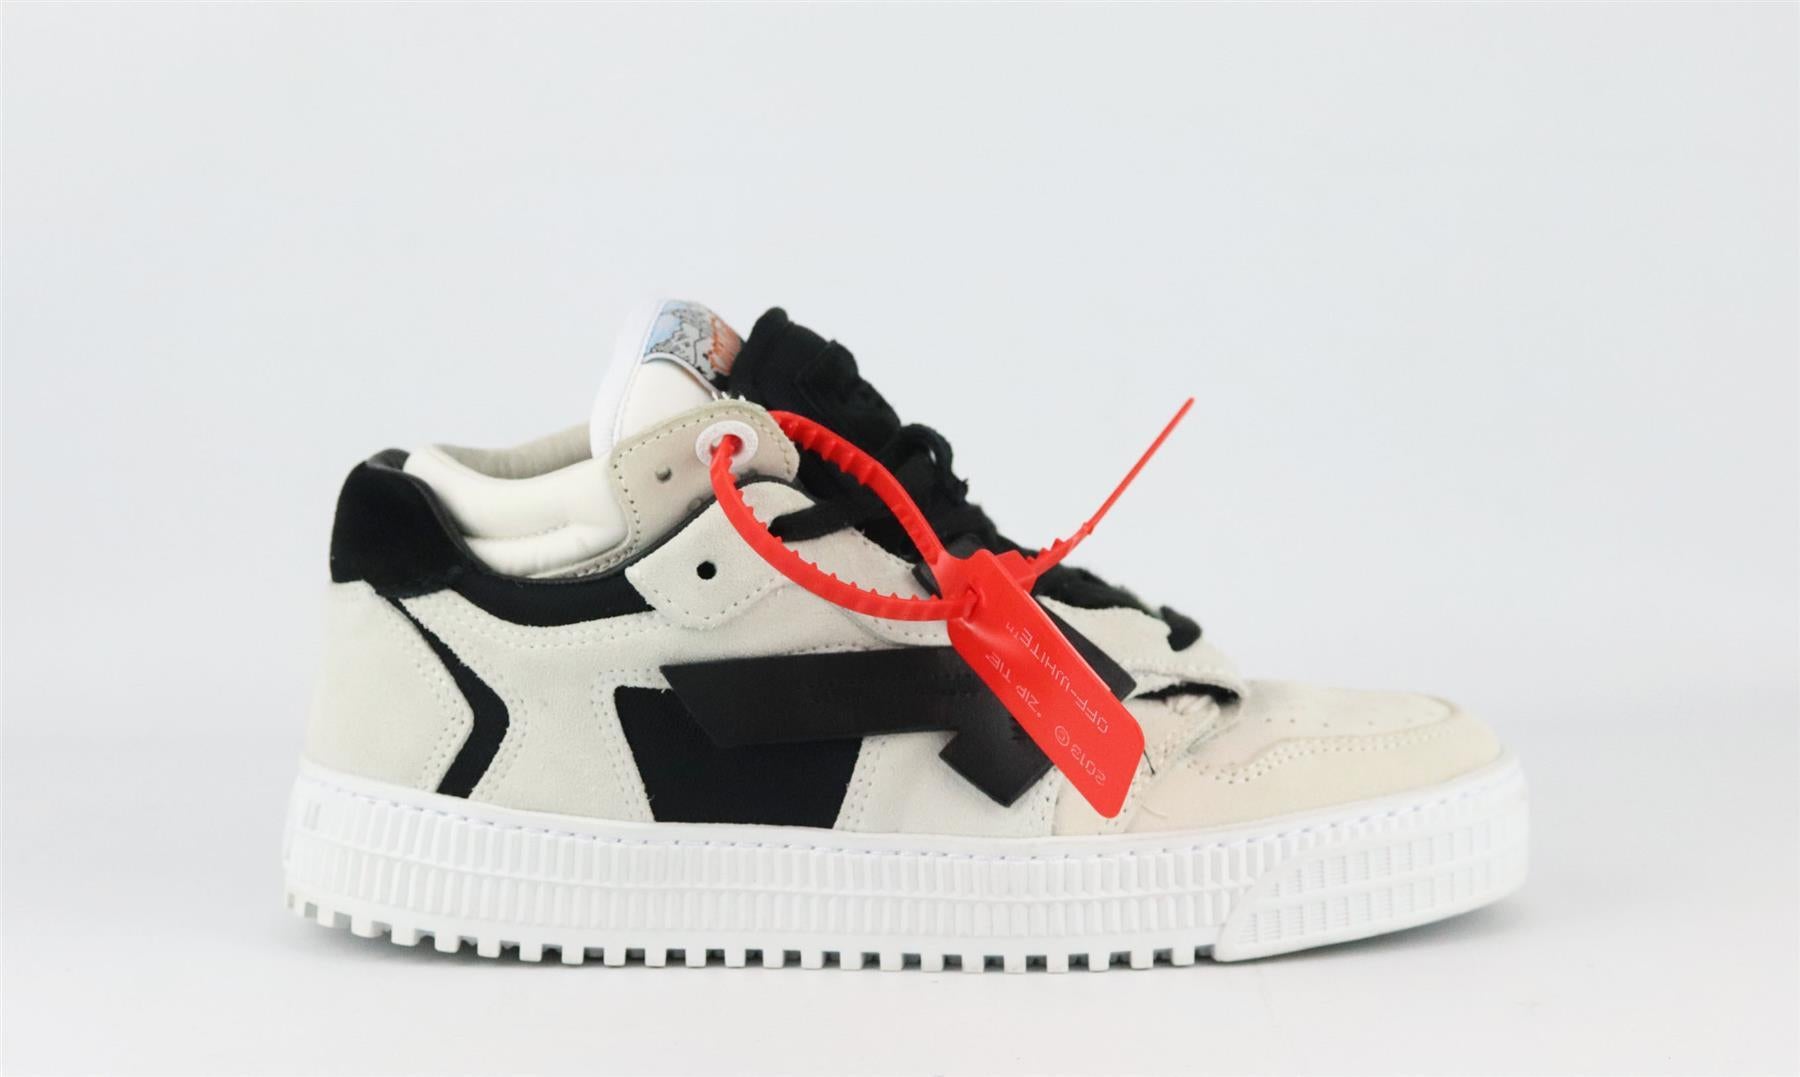 These ‘Out of Office’ sneakers by Off-White are made from a mix of leather and suede appliqued with the brand's tongue-in-cheek arrow, they have a low-top silhouette and oversized silhouette. Rubber sole measures approximately 30 mm/ 1.2 inches.